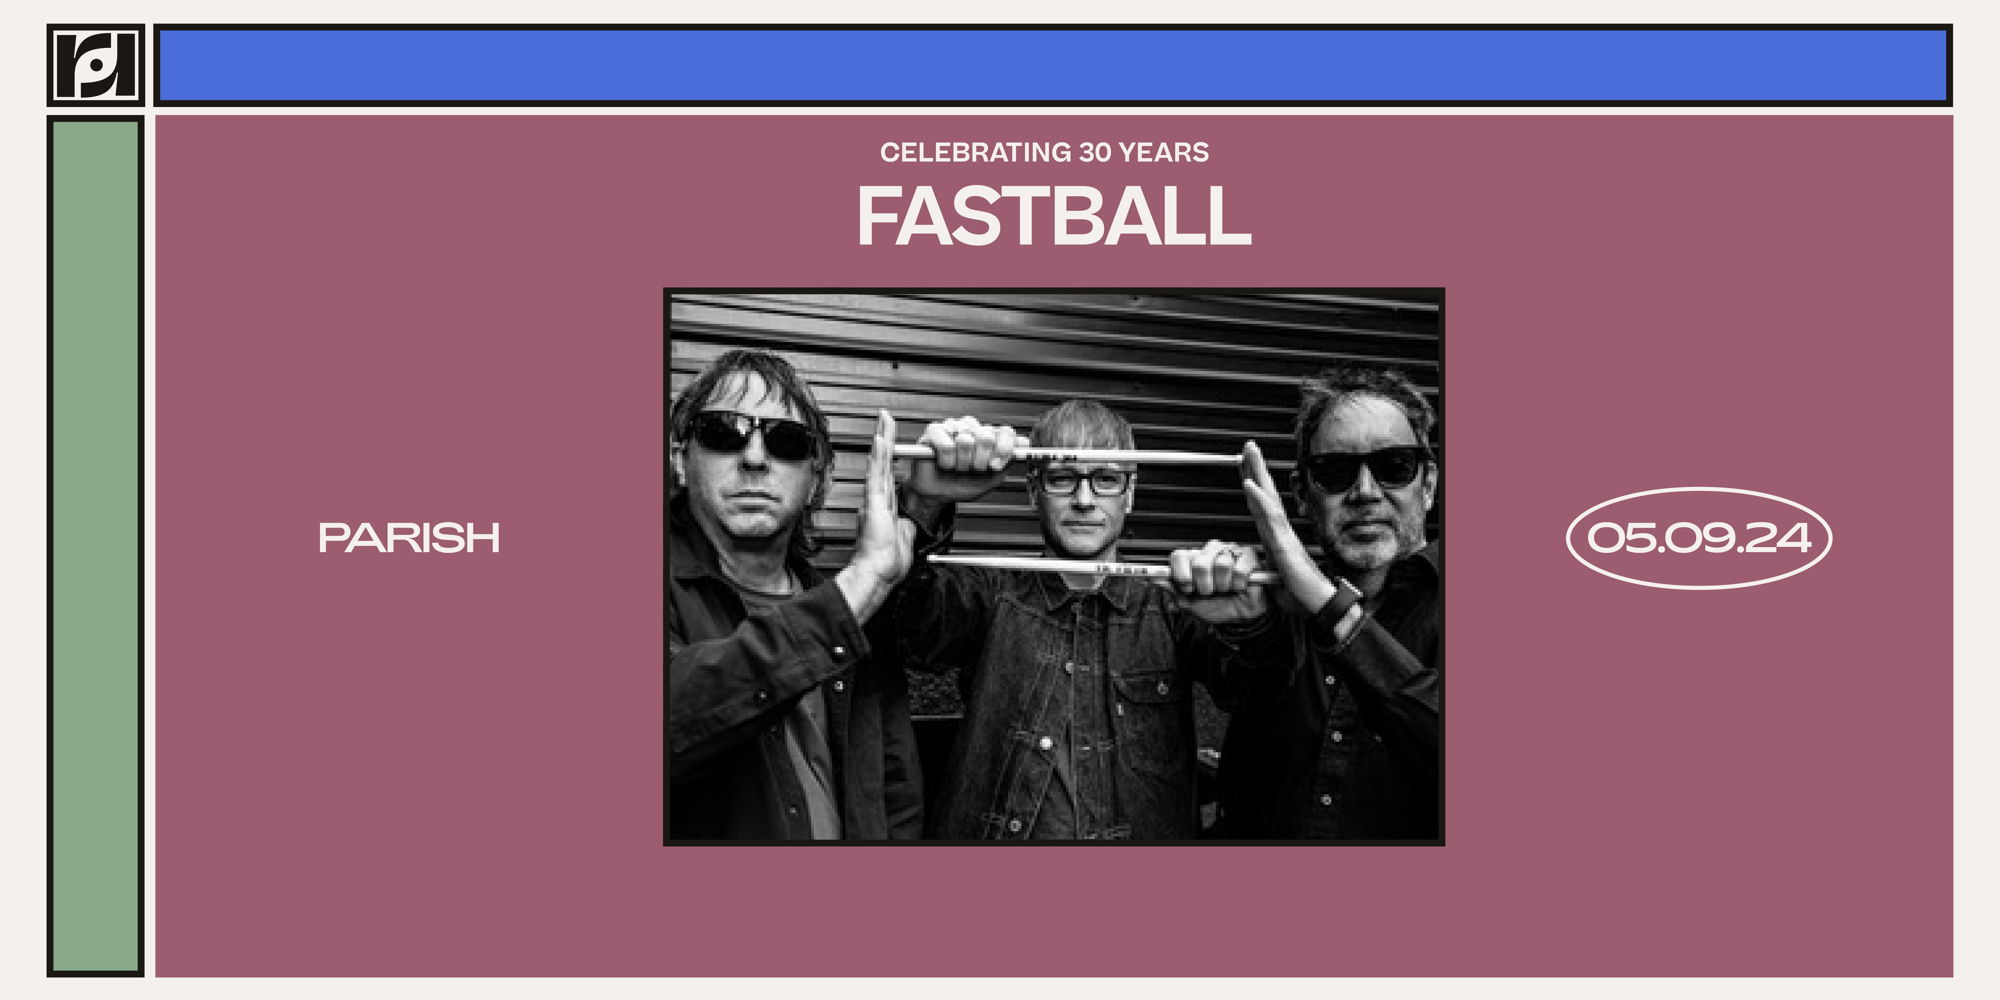 Fastball-Celebrating 30 Years at the Parish on 5/9 promotional image